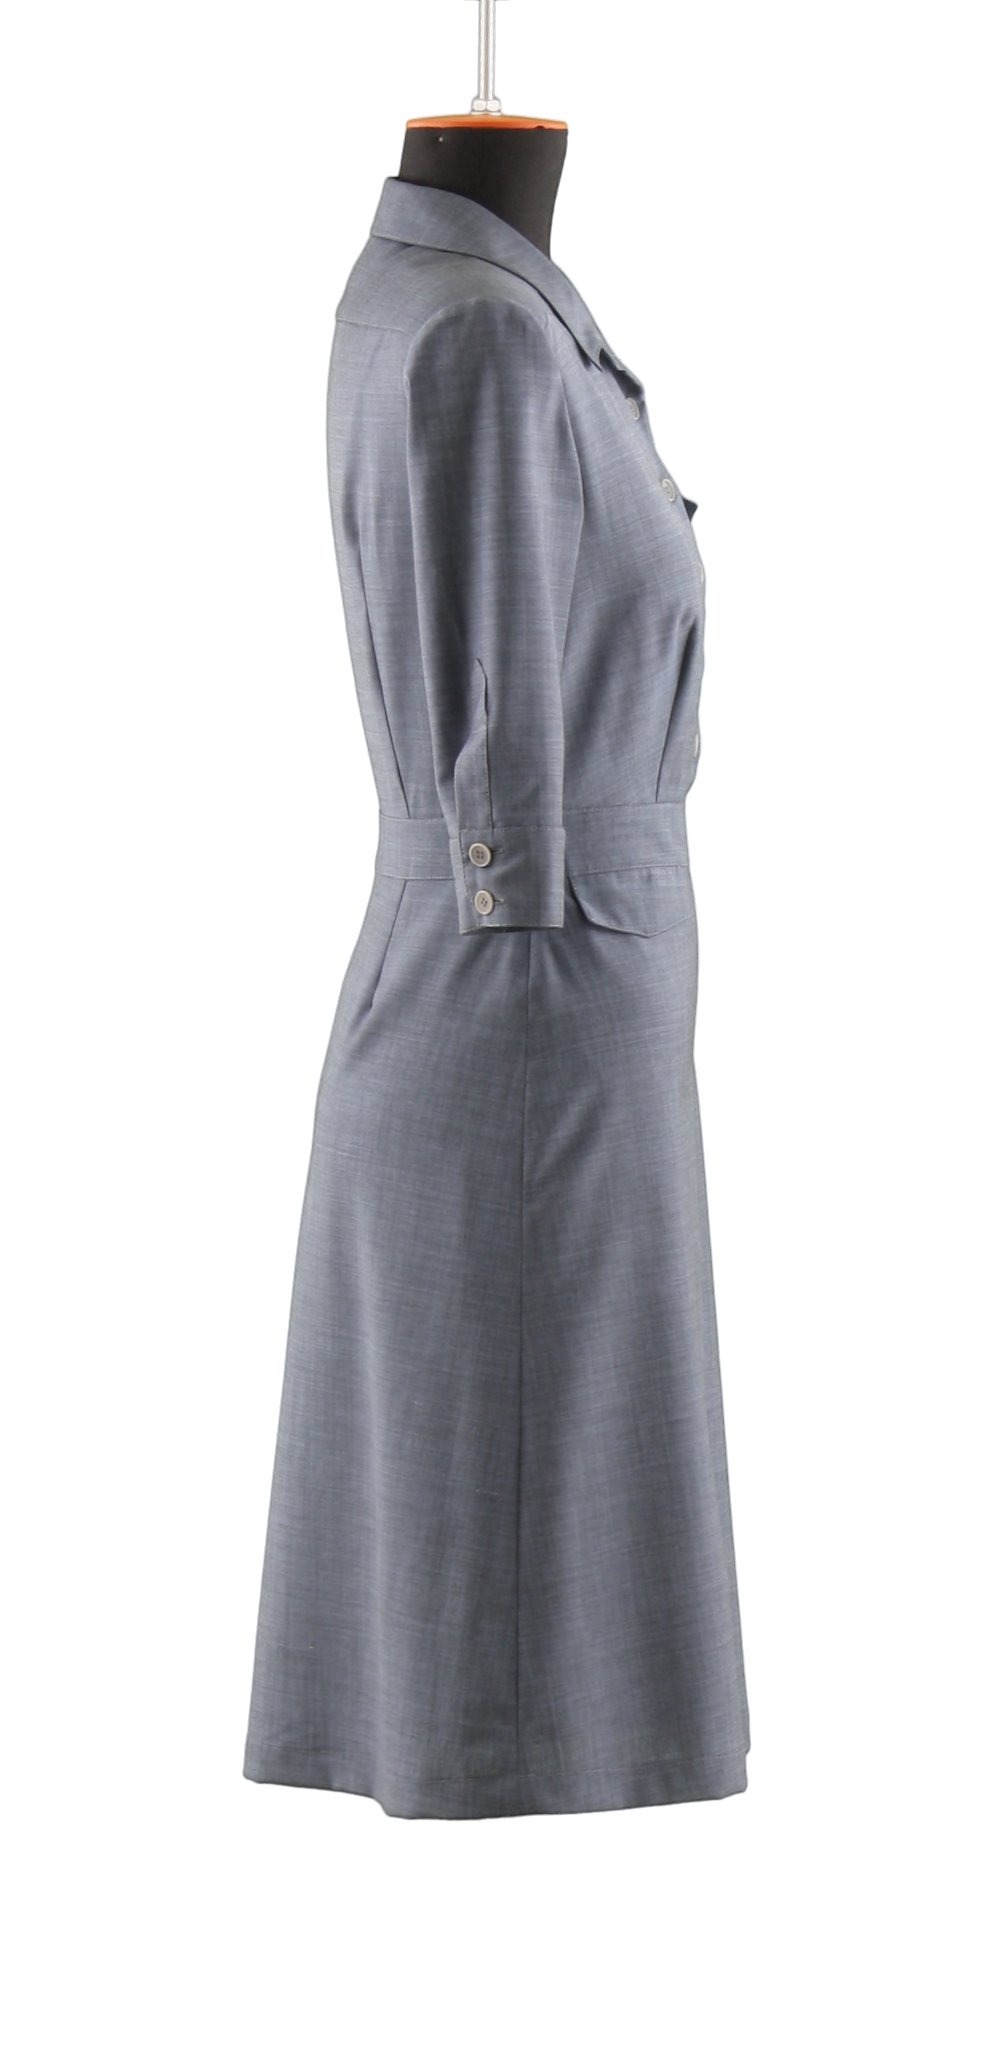 A simple grey, buttoned uniform dress belonging to the women collection with three quarter sleeves in side view on a headless mannequin with cutout background.